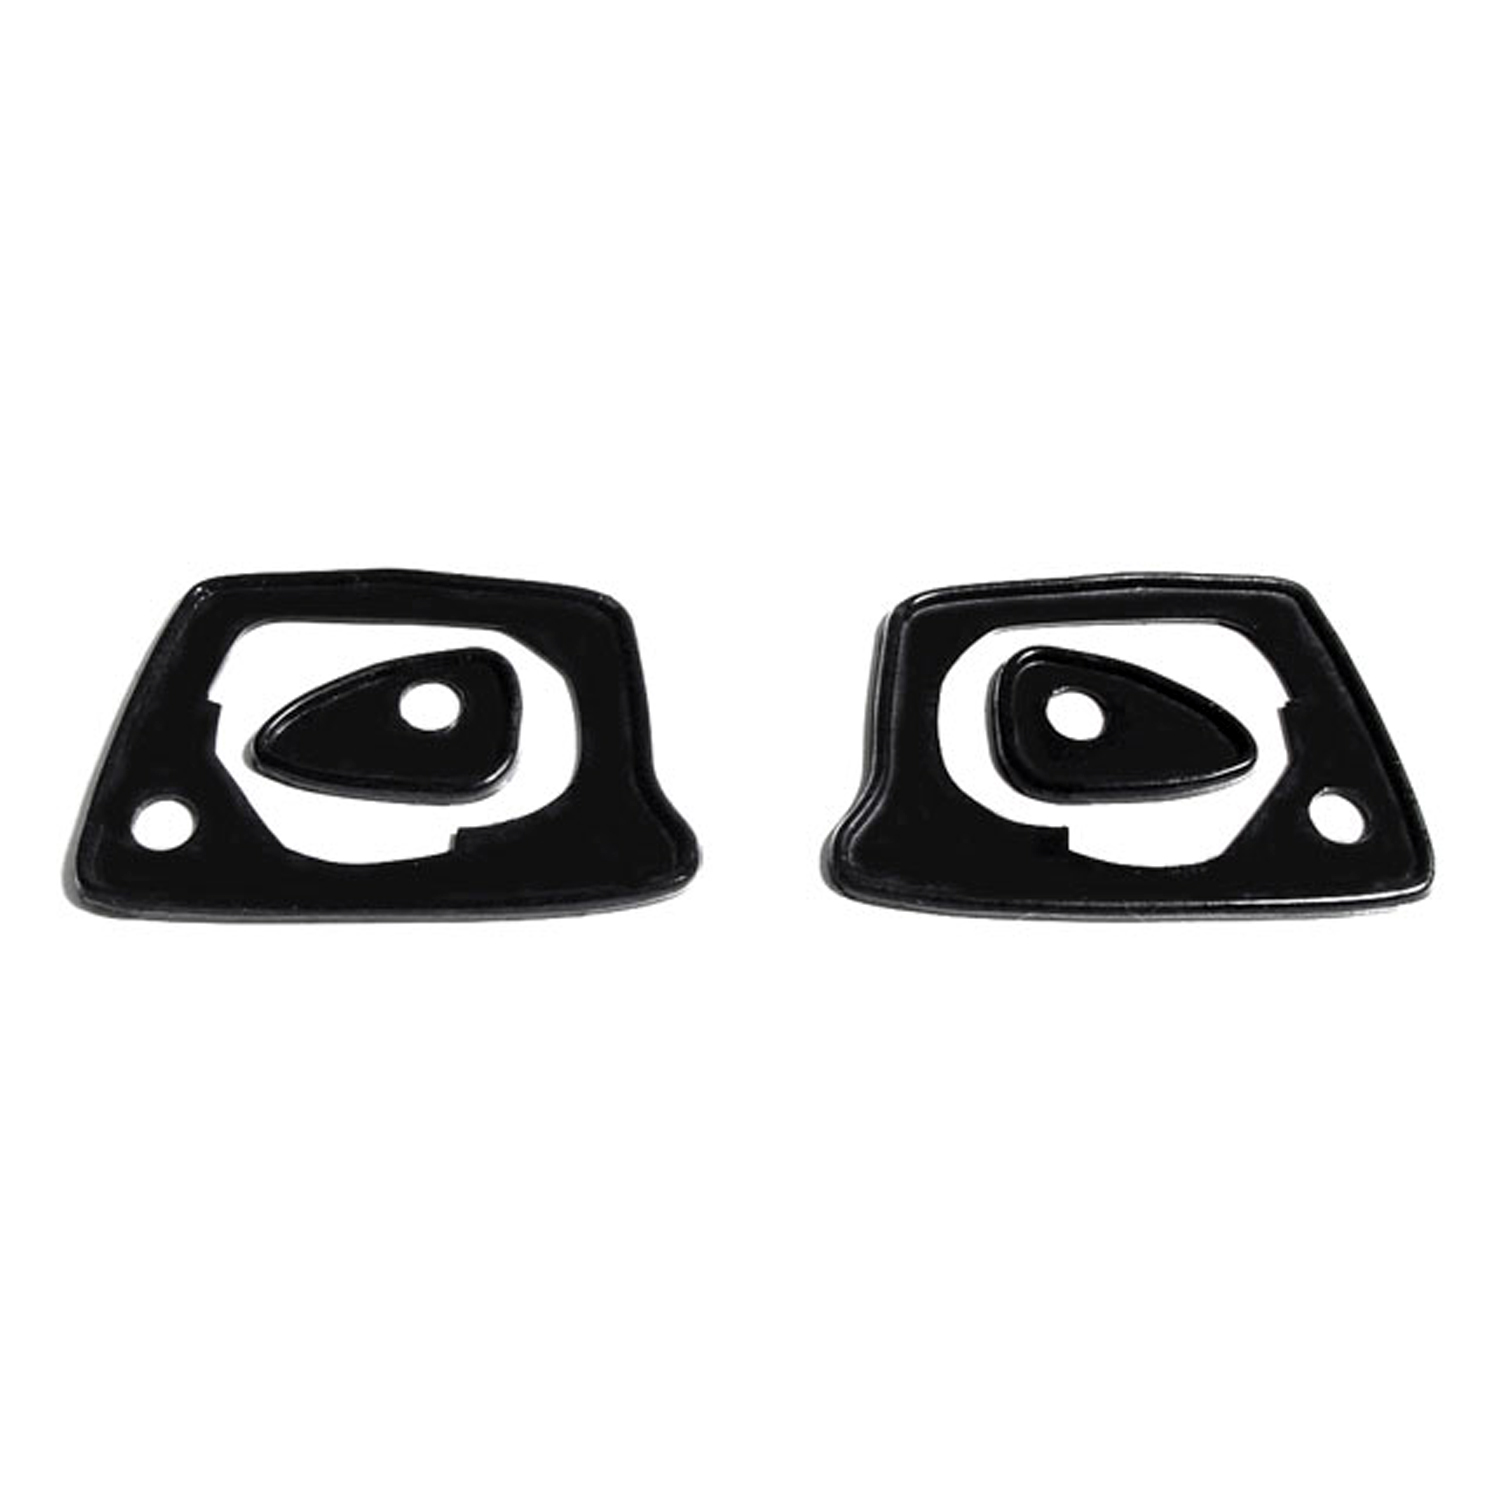 1974 Plymouth Fury III Door handle mounting pads.  2-3/8 in. L x 1-1/8 in. L-MP 959-B